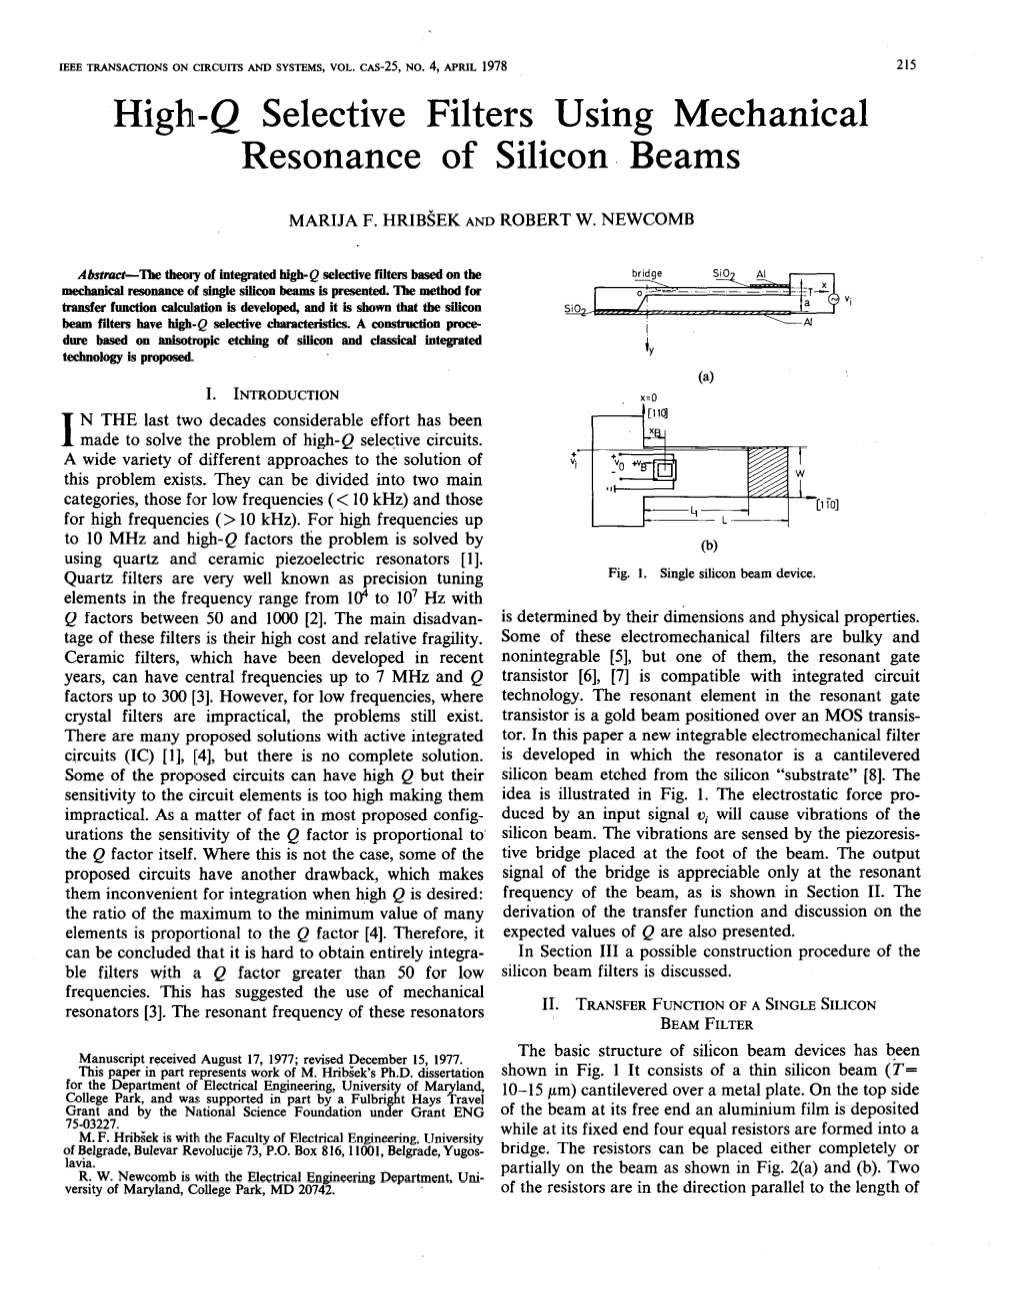 Highs-Q Selective Filters Using Mechanical Resonance of Silicon